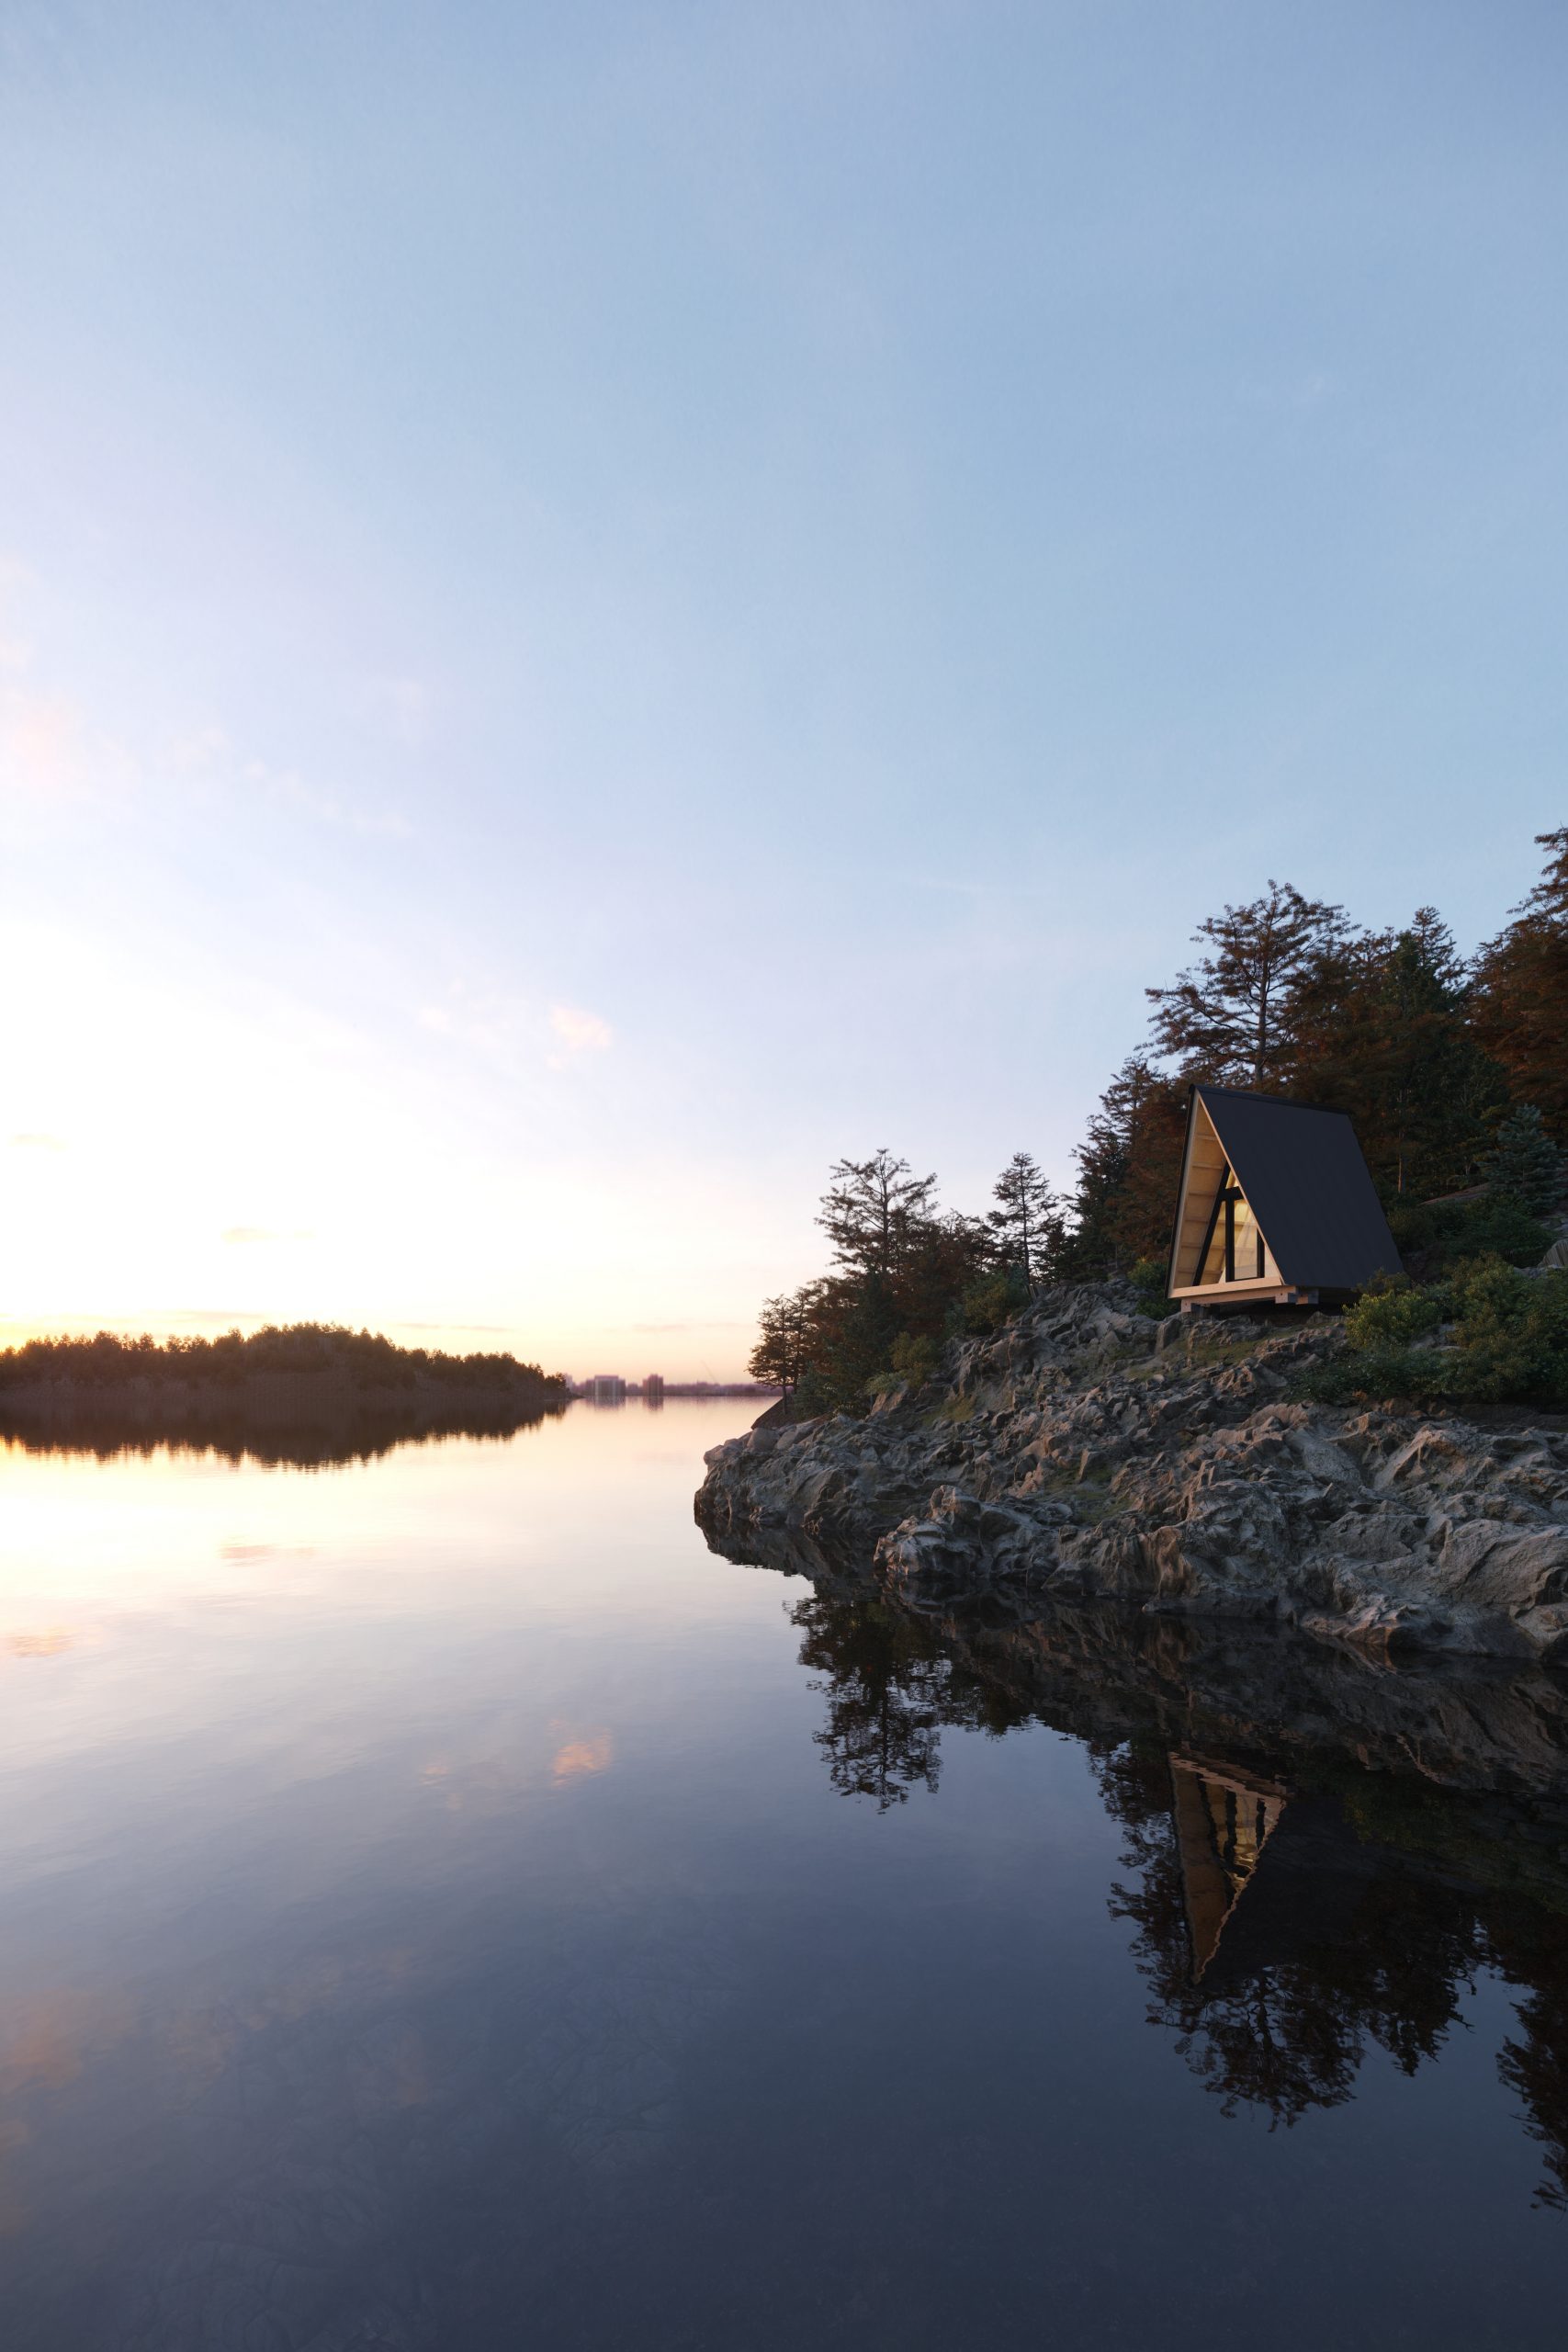 This Company Is Making It Easy to Build Your Own Cabin in the